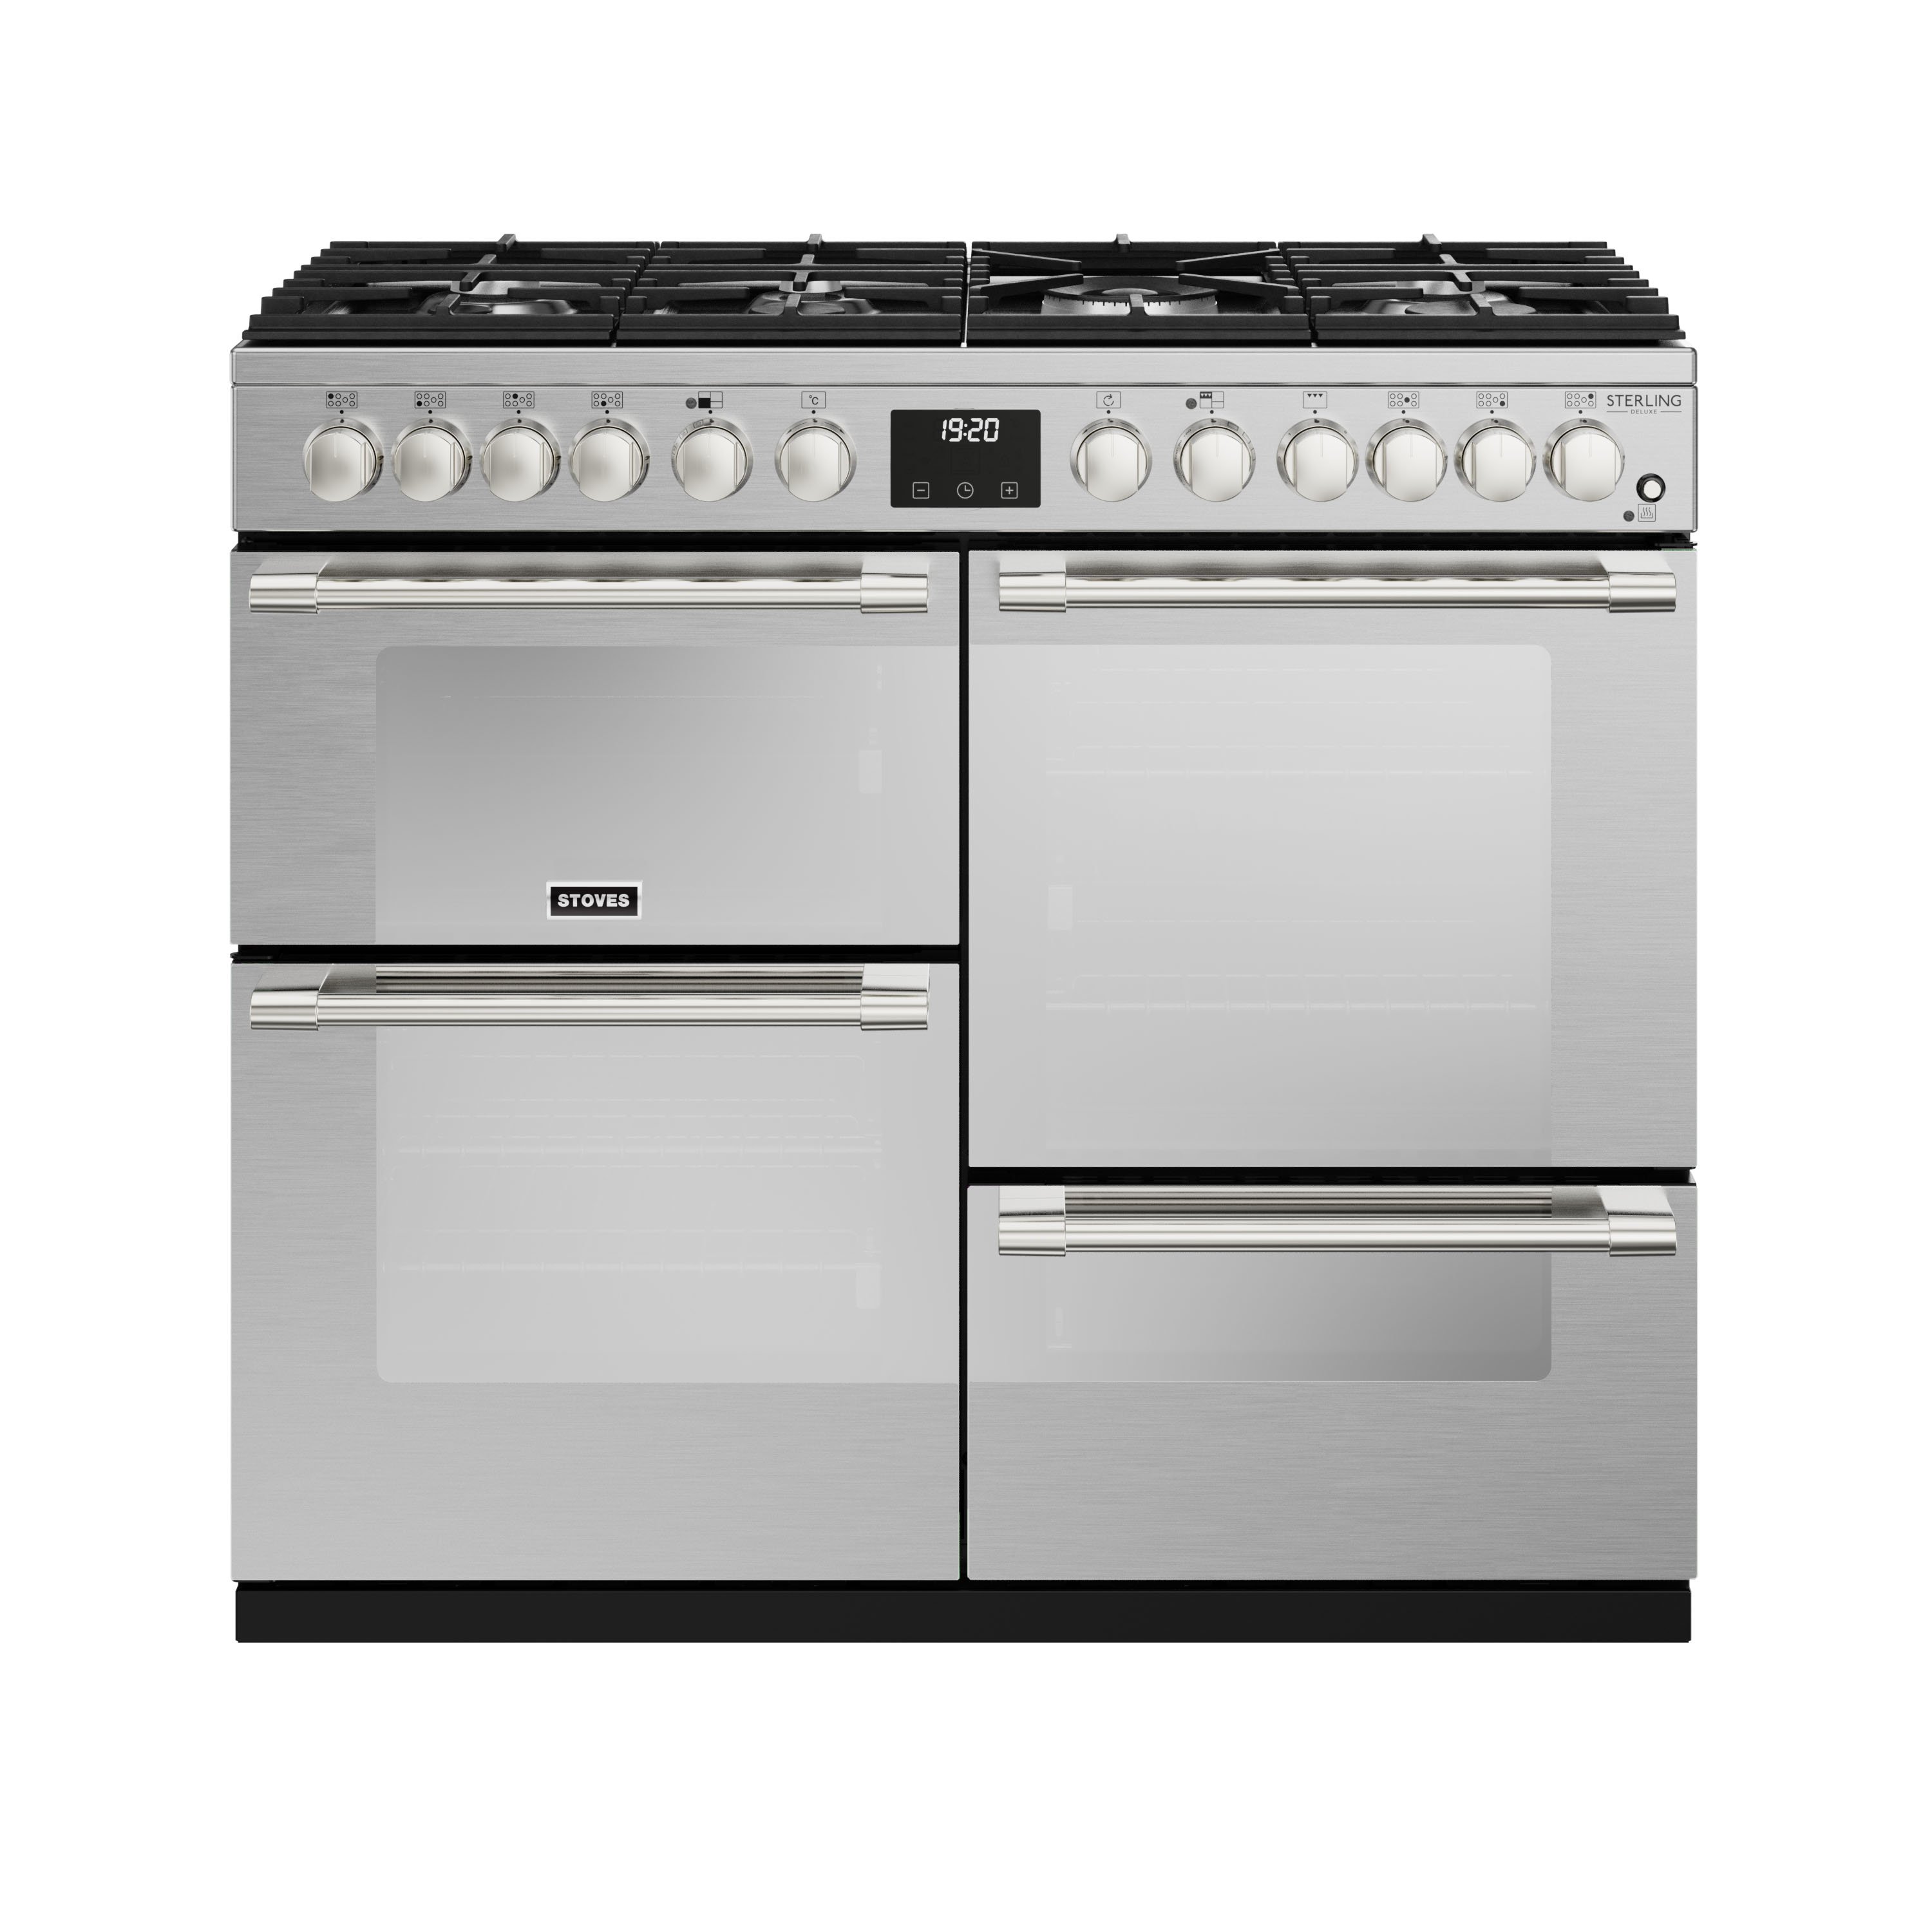 100cm dual fuel range cooker with a 7 burner gas hob, conventional oven & grill, multifunction main oven with TrueTemp digital thermostat, fanned second oven and dedicated slow cook oven